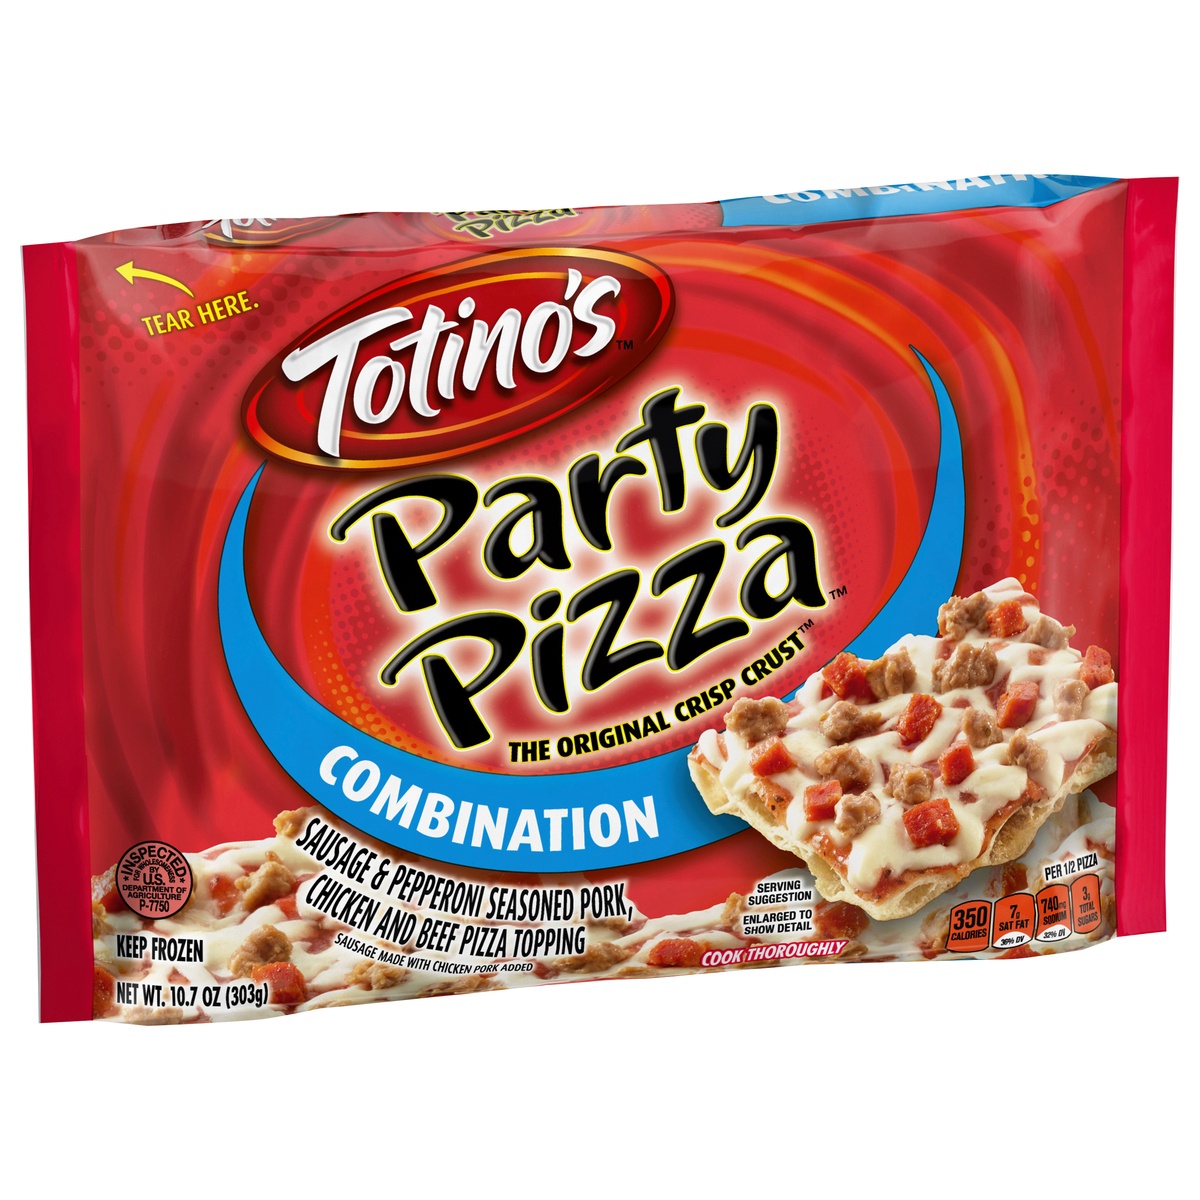 slide 2 of 11, Totino's Party Pizza, Combination,(frozen), 10.7 oz